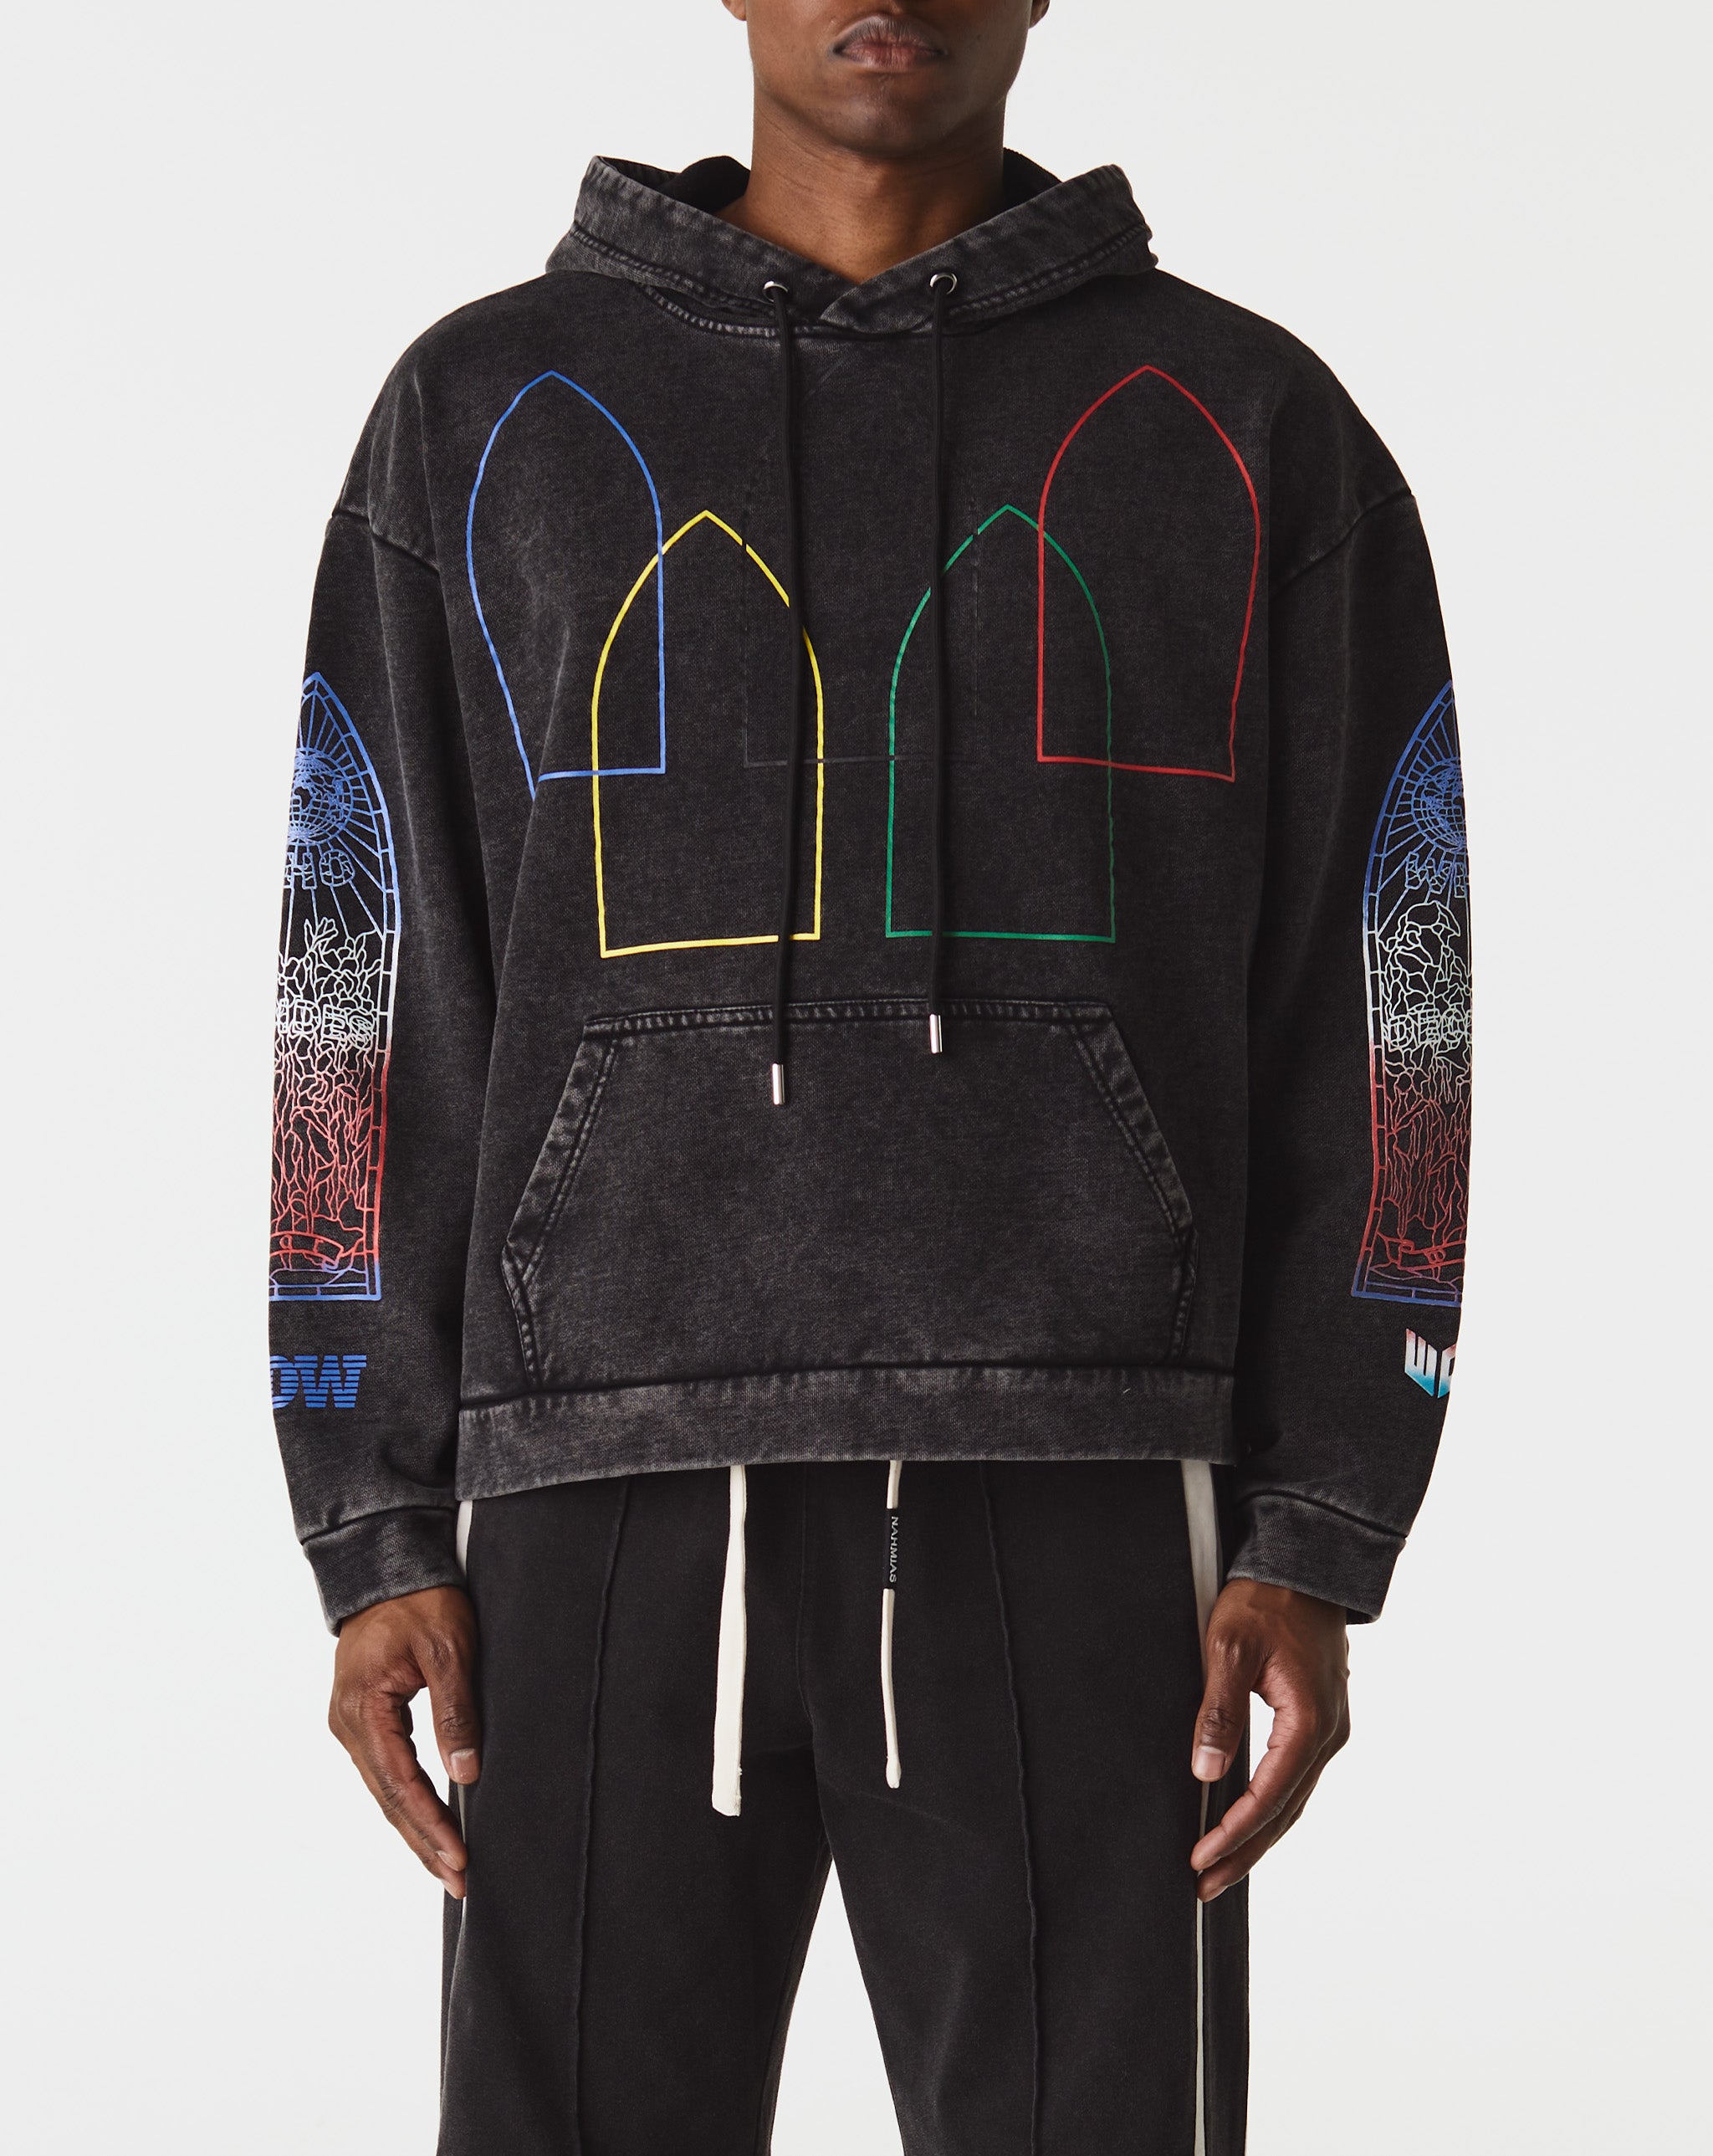 Who Decides War Intertwined Windows Hoodie  - XHIBITION